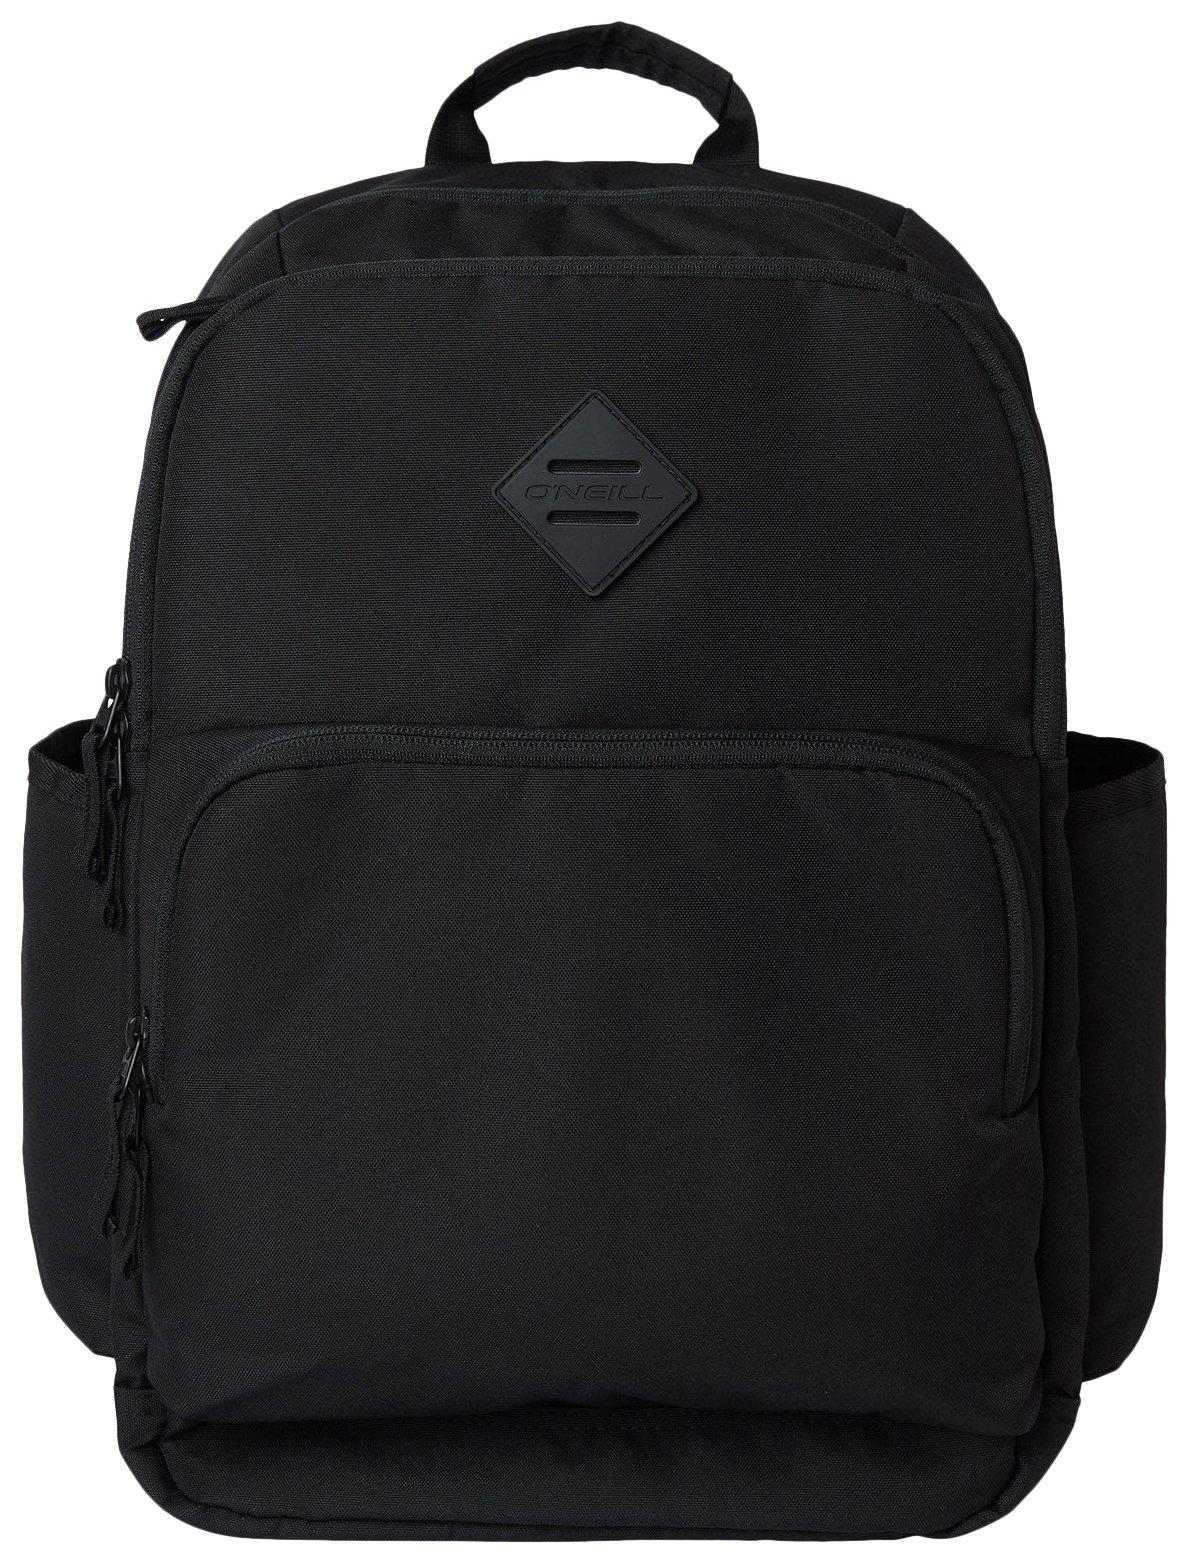 Poly Canvas School Bag Backpack